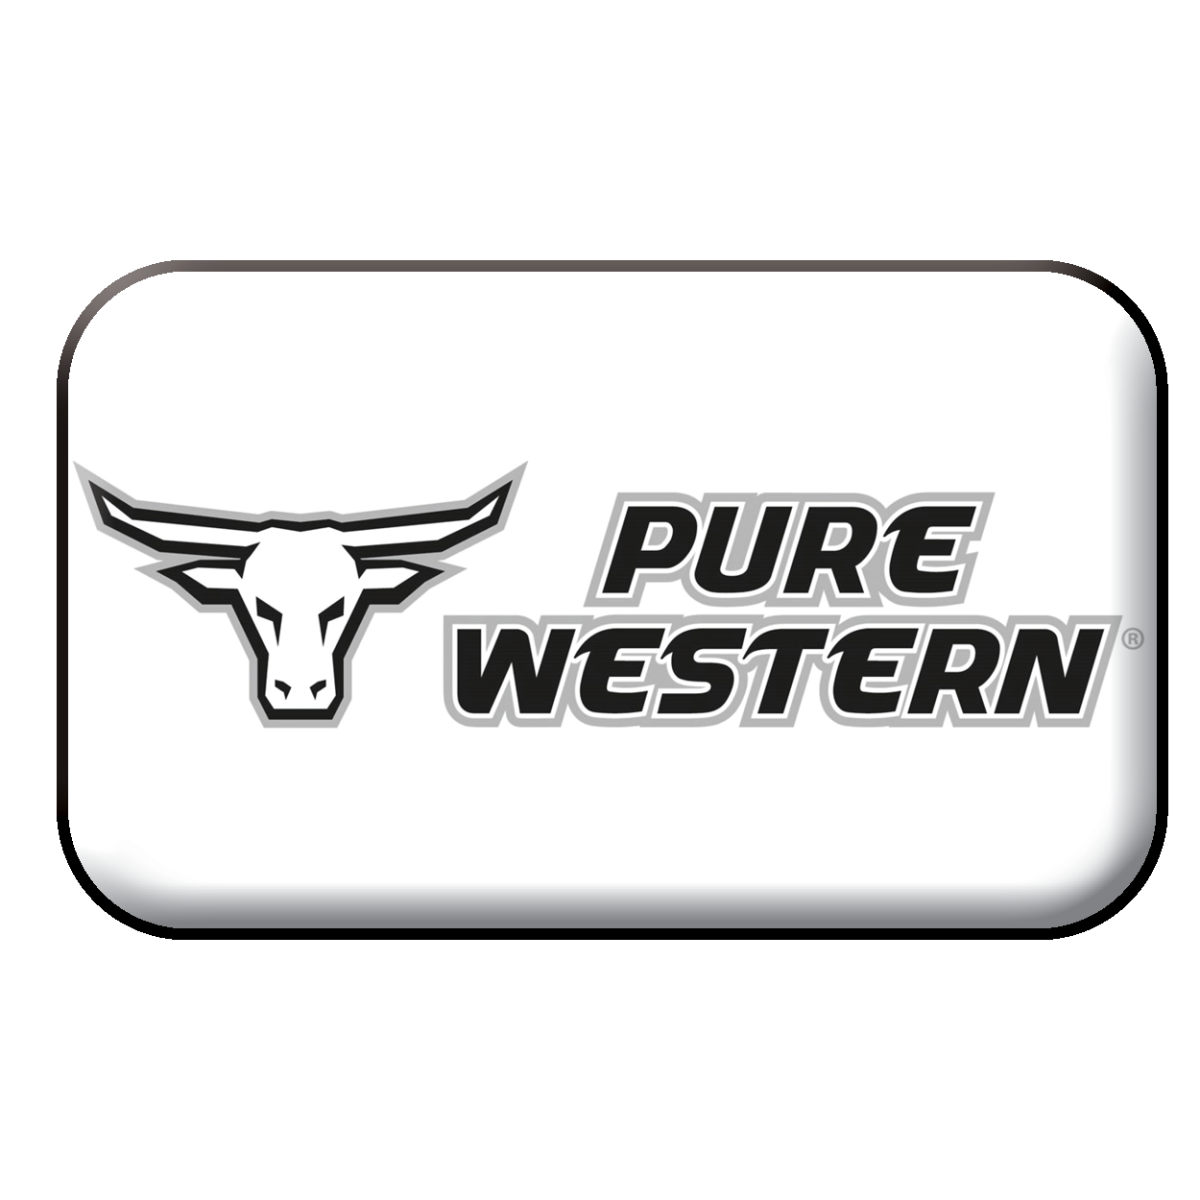 Pure western hats